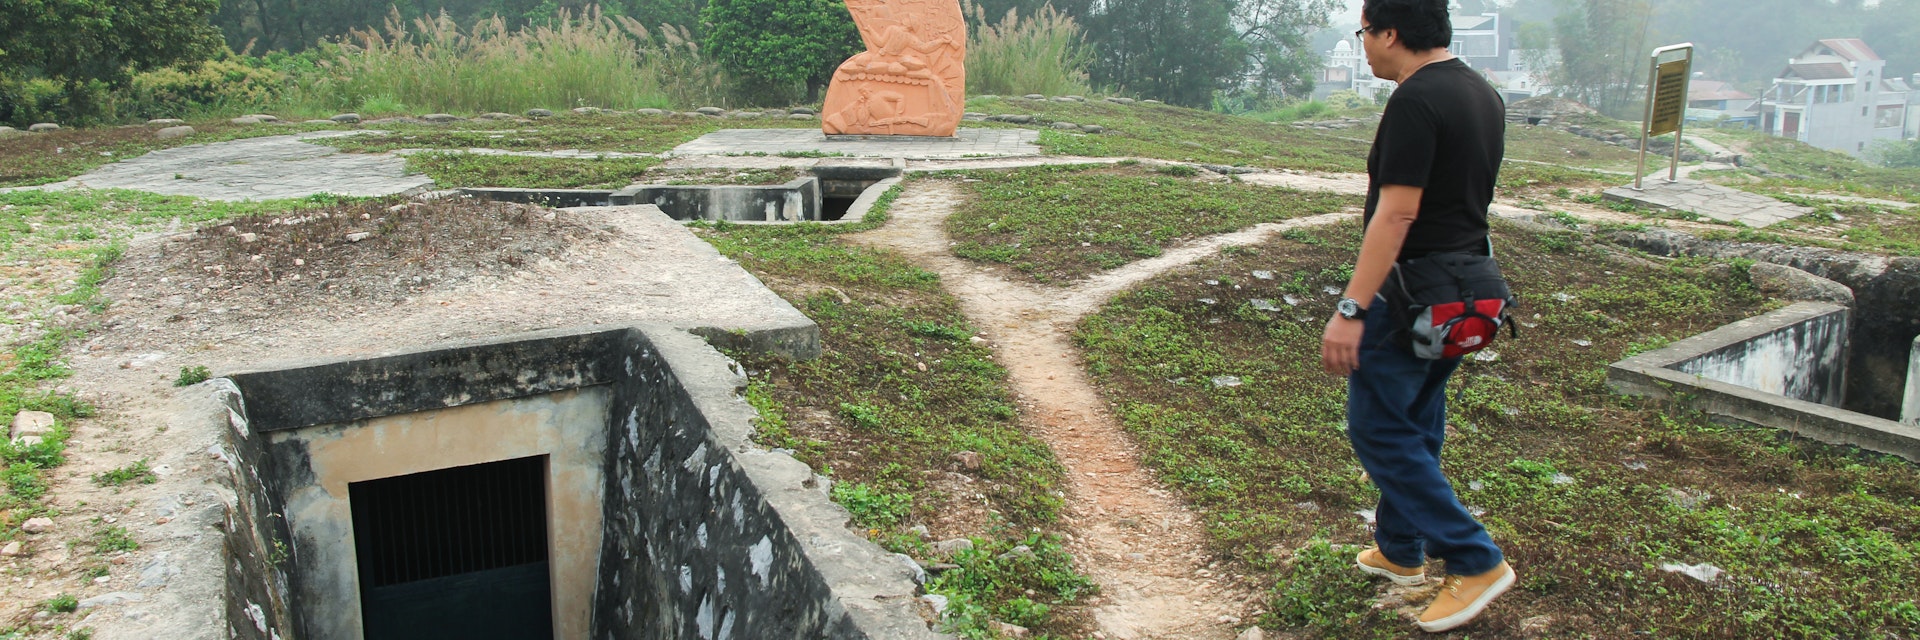 Trench warfare at A1 Hill, a famous historical site from the battle of Dien Bien Phu.